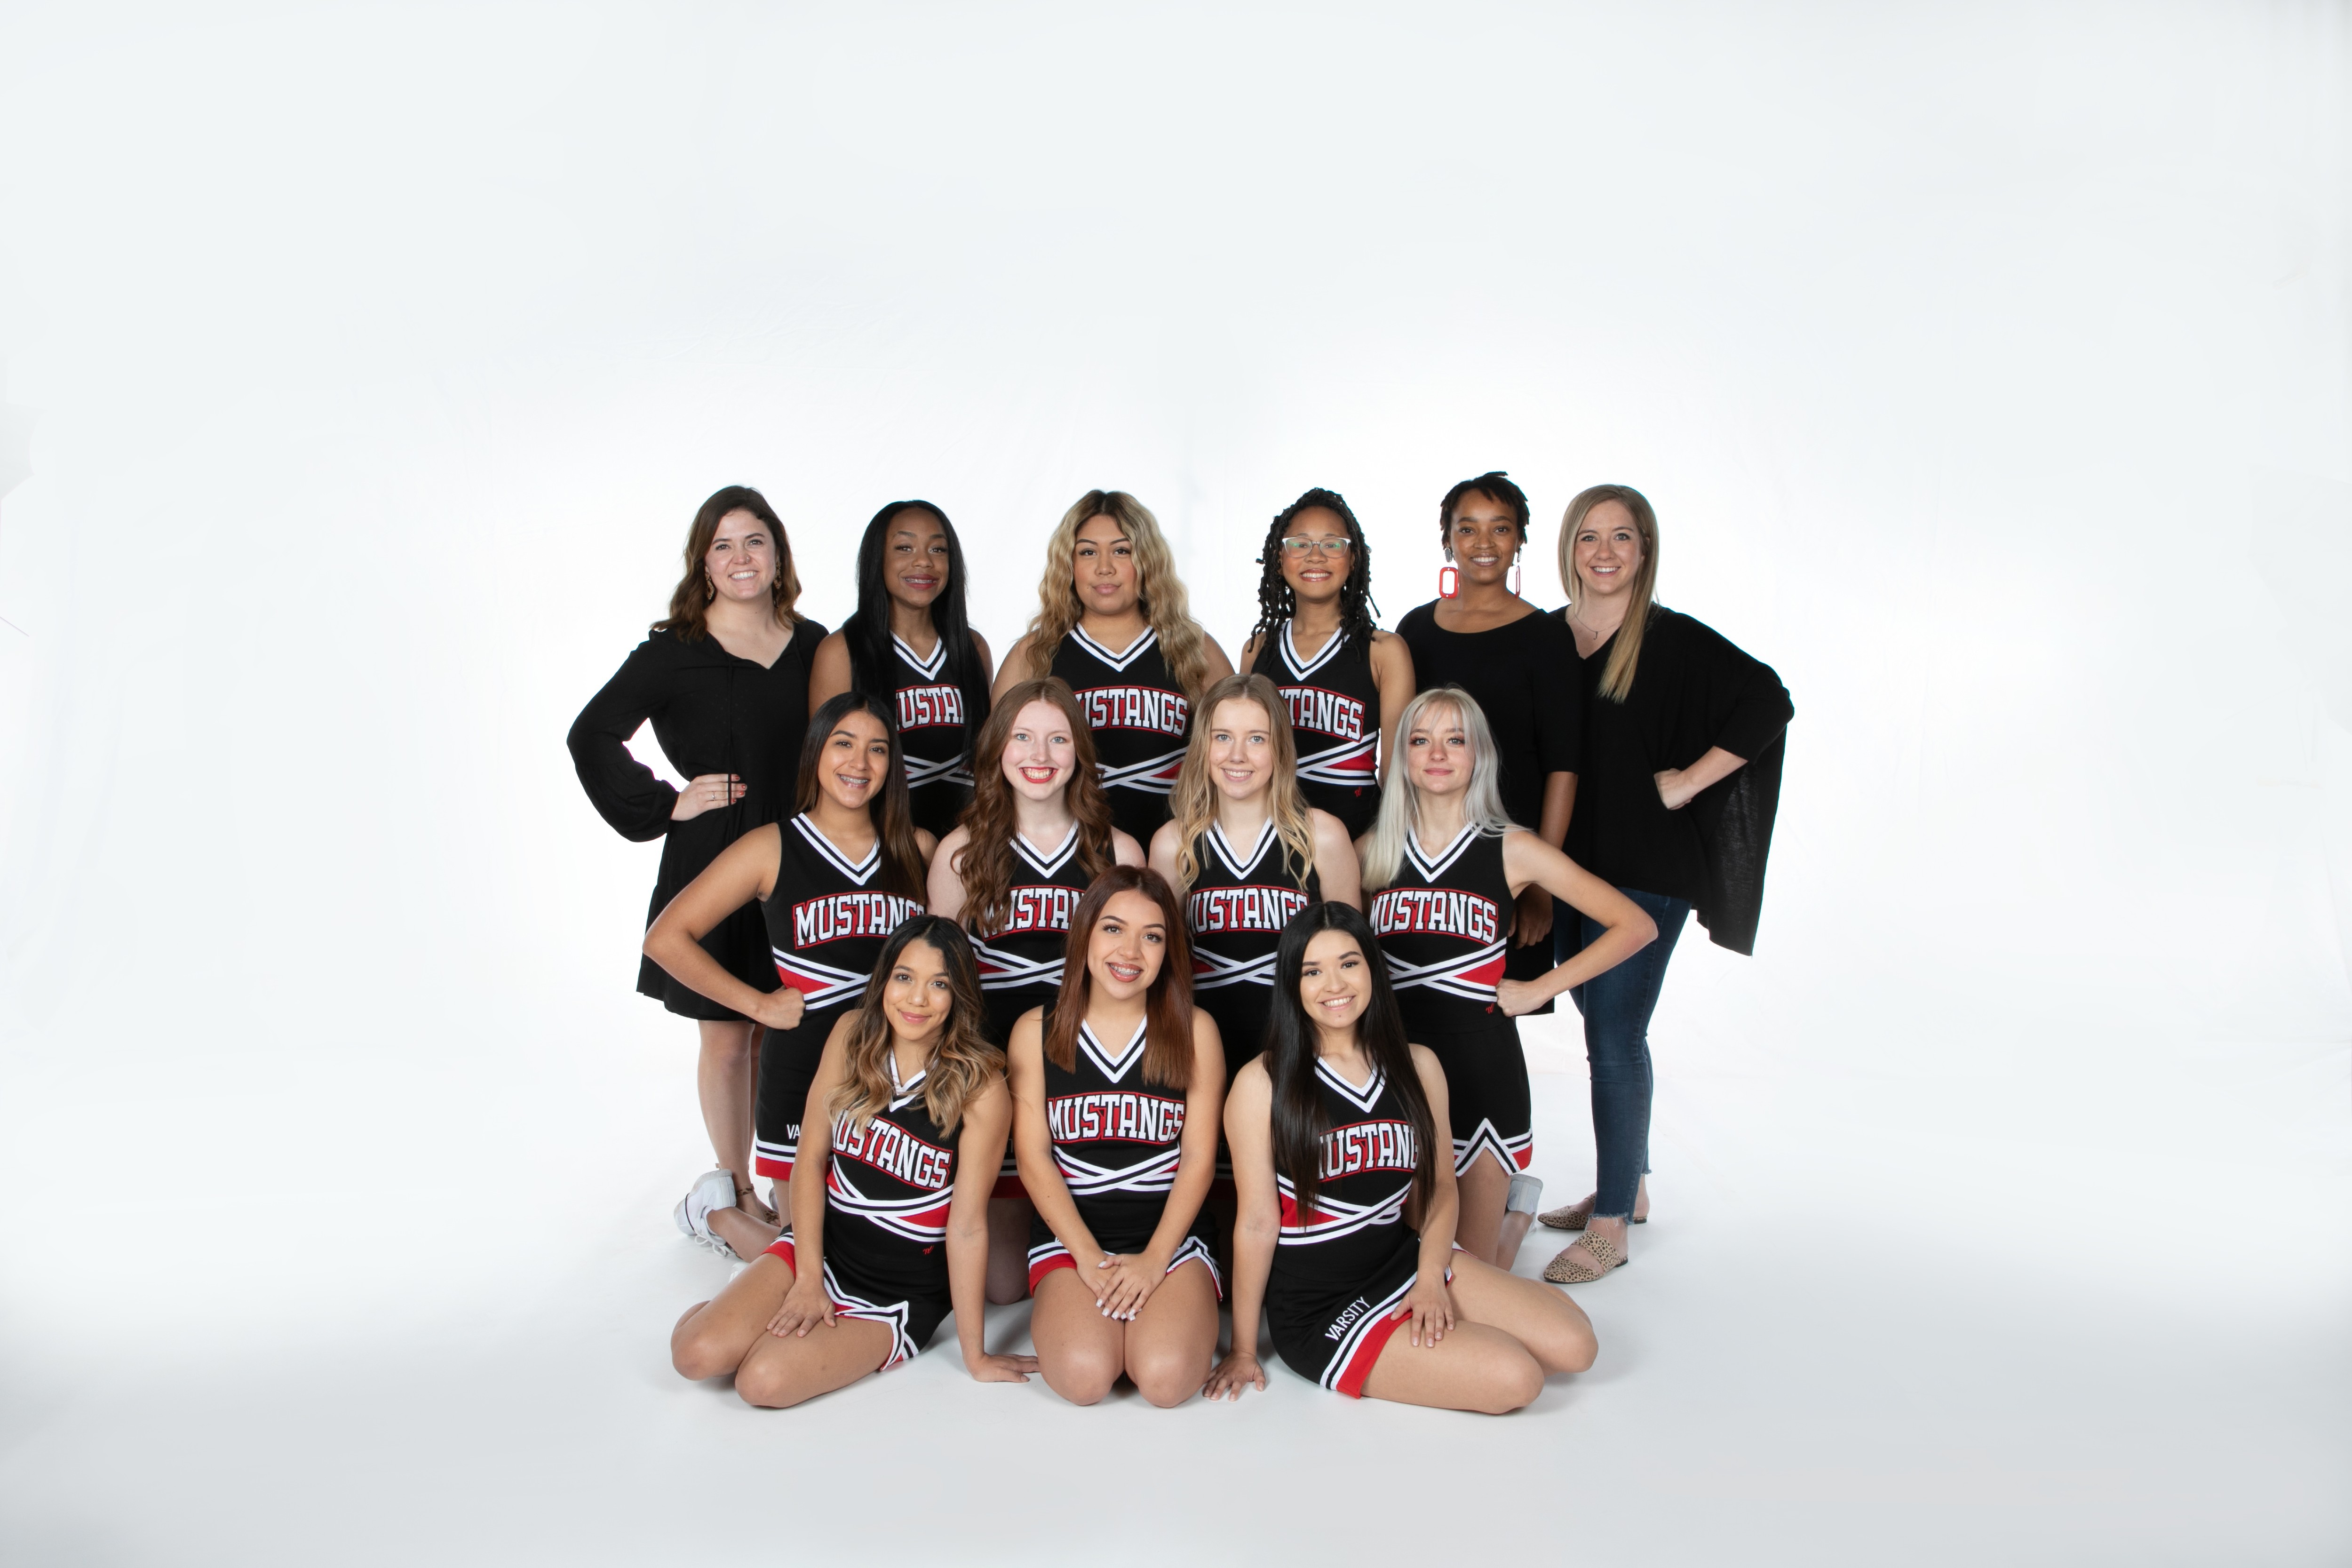 PledgeCents Cause Creekview Cheerleading by Tiffany Isaac, Creekview